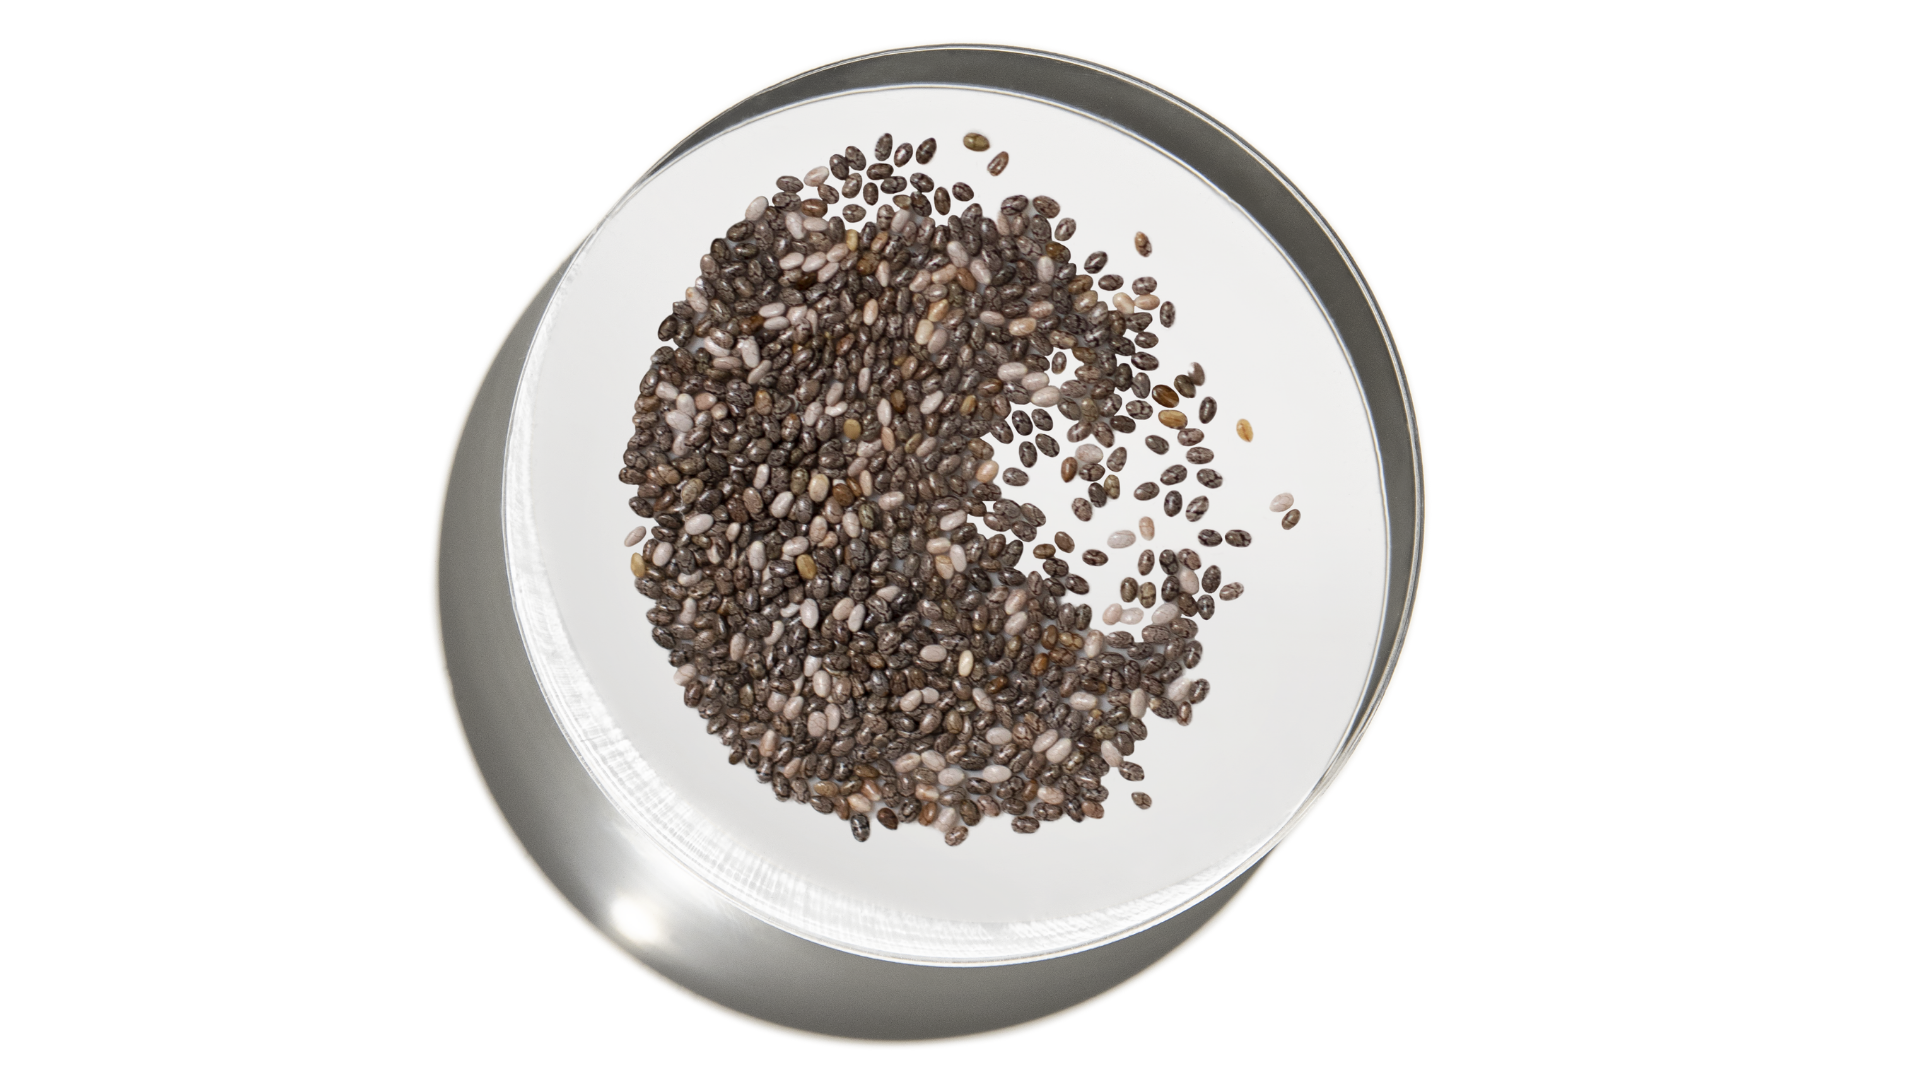 What is Chia?